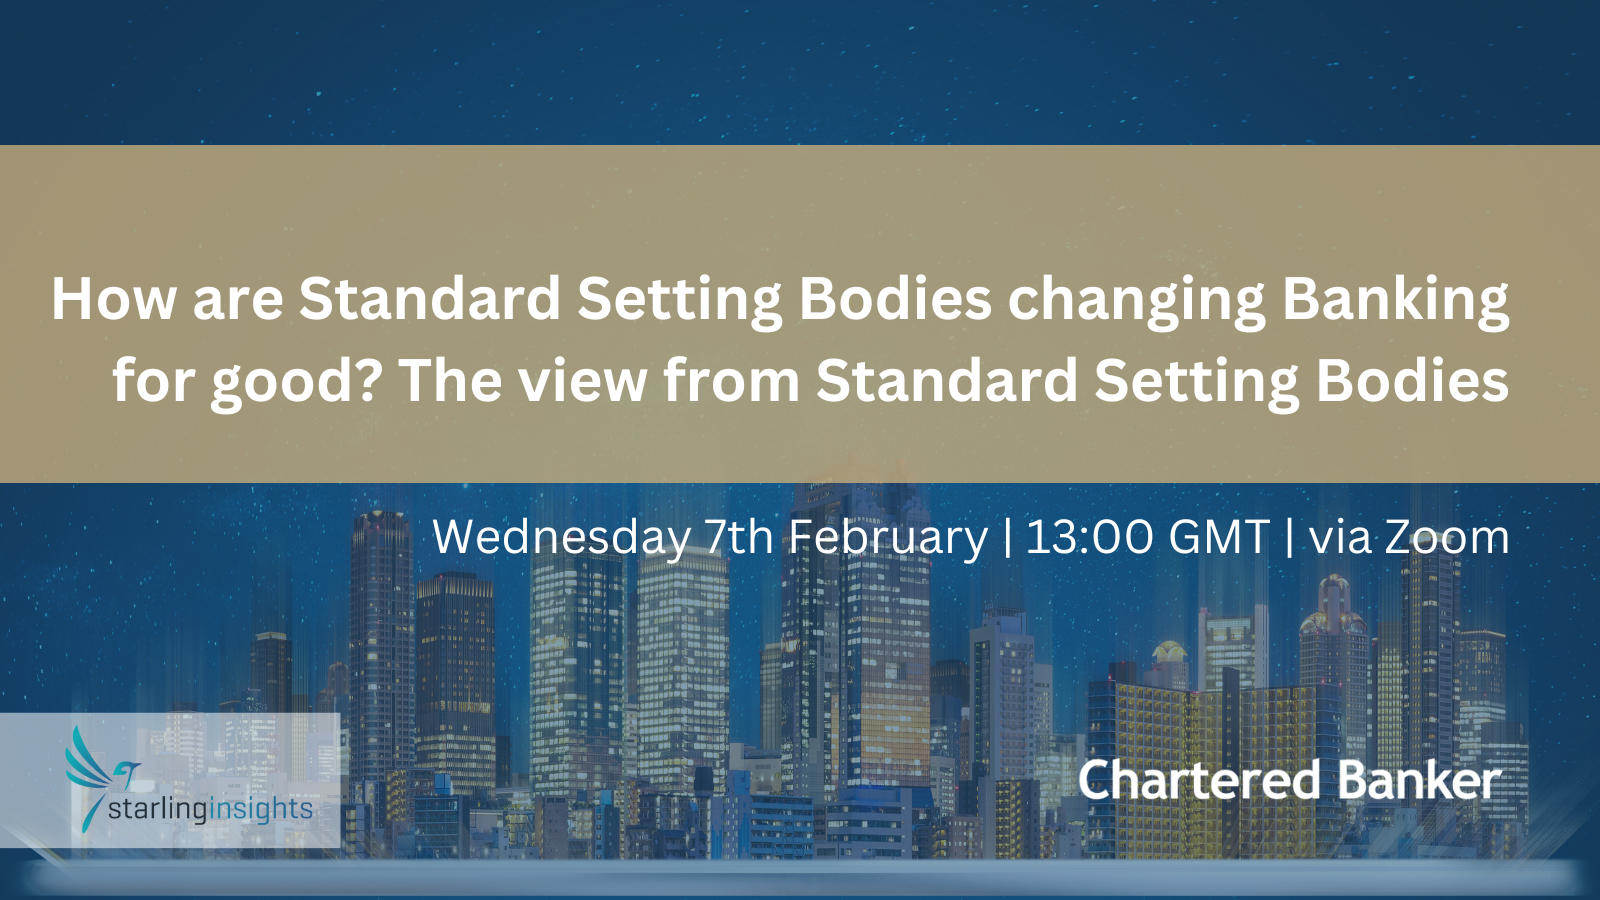 How are Standard Setting Bodies changing Banking for good? The view from Standard Setting Bodies